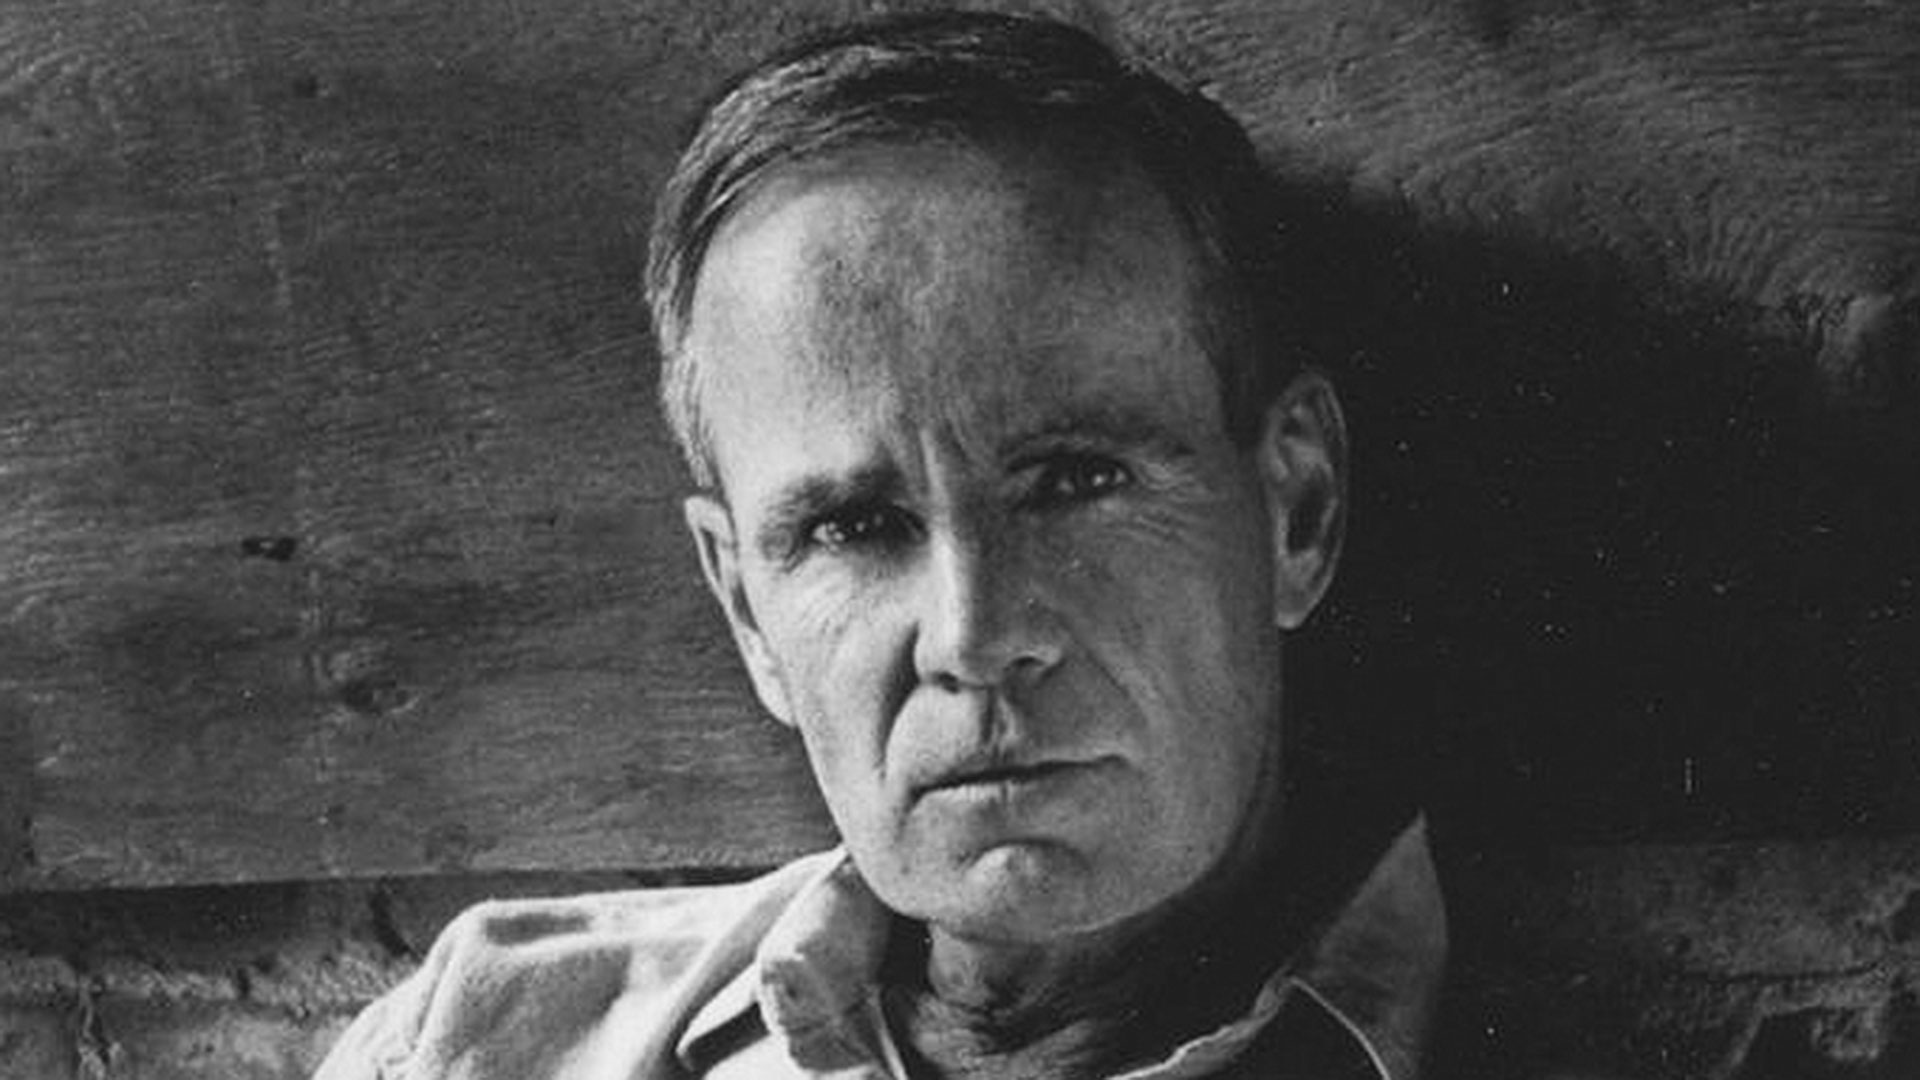 With "Road"Cormac McCarthy not only won the Pulitzer Prize, but he also won a spot in Oprah's Book Club.